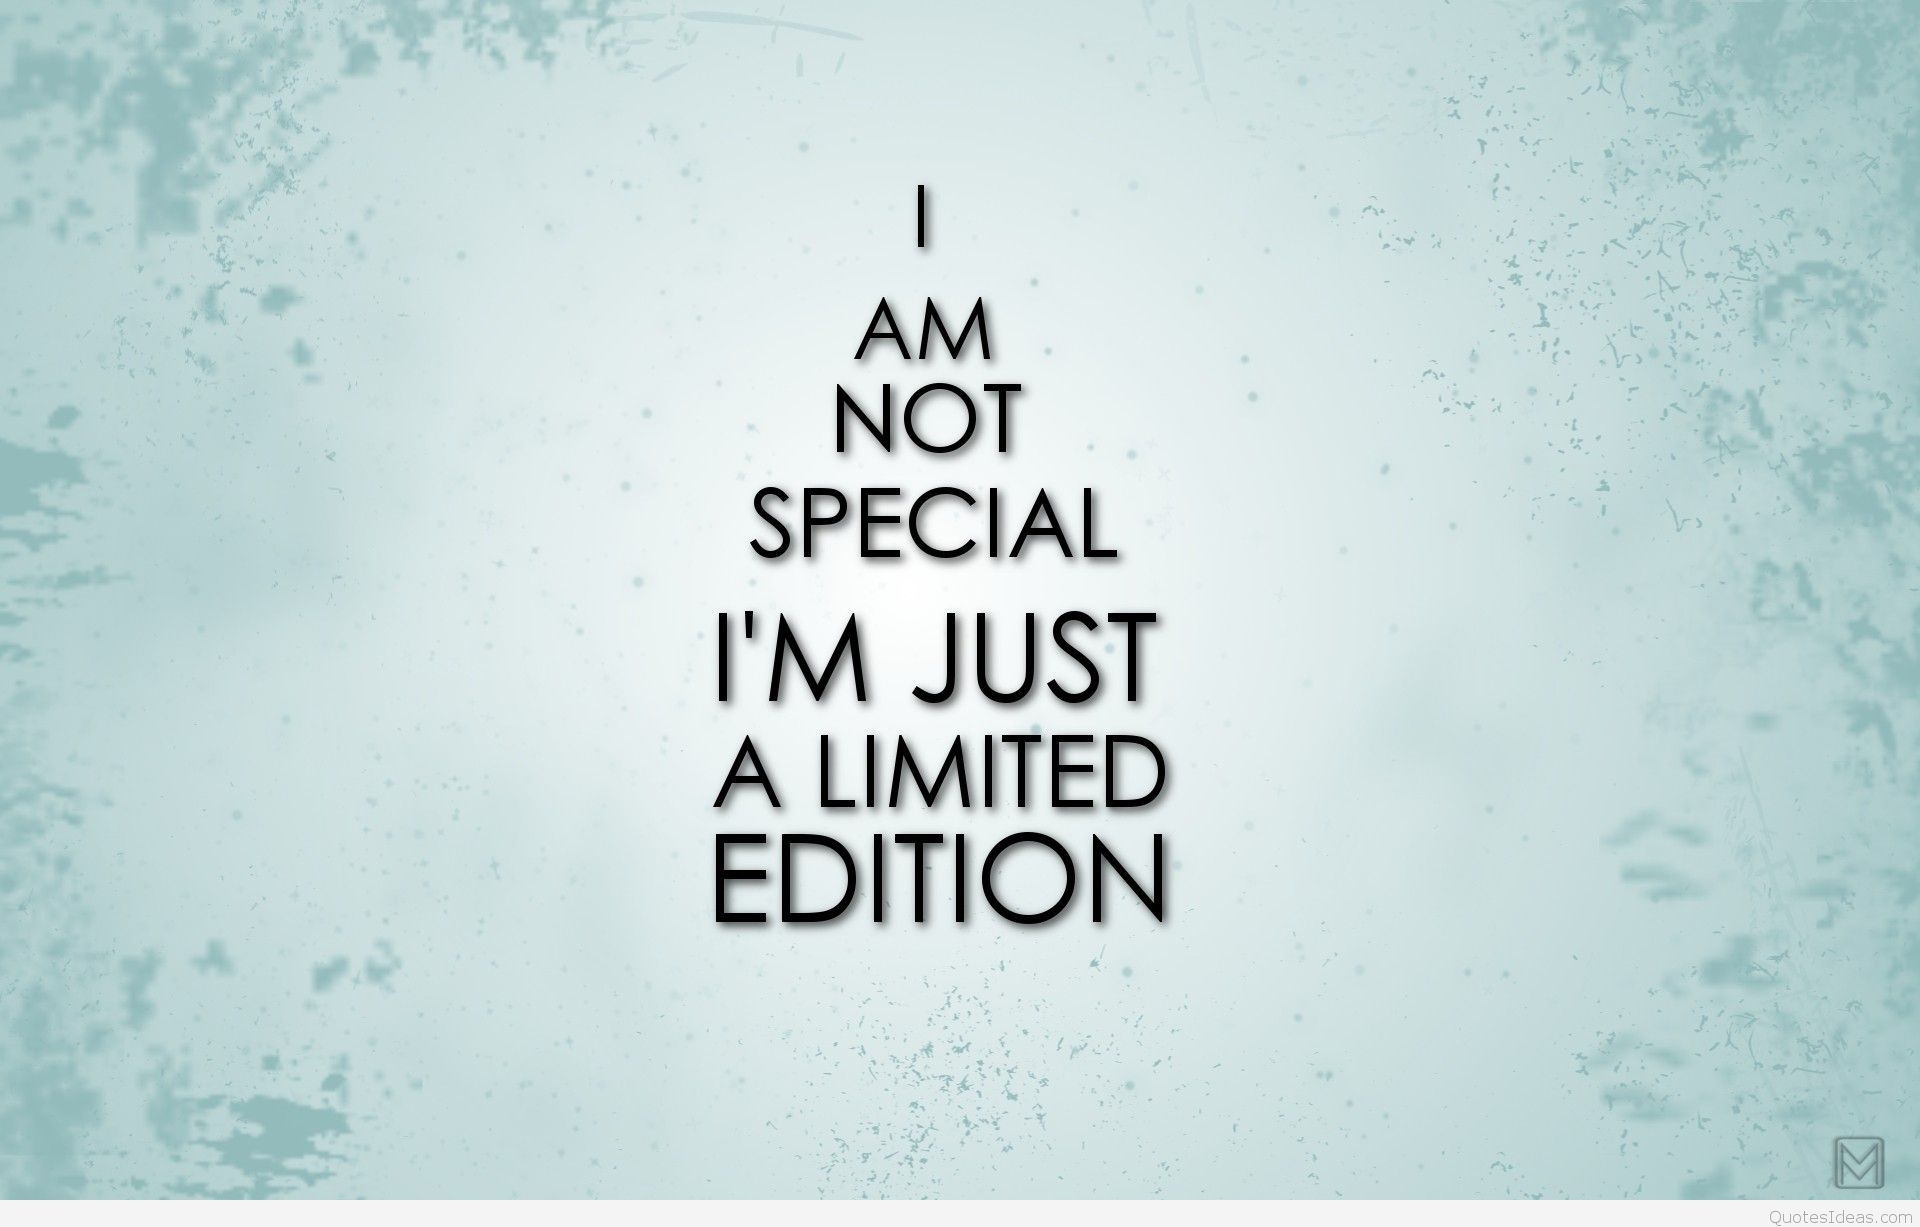 iam-not-special-funny-quotes-wallpapers-hd-wallpaper-religion-photo-quotes-wallpaper.jpg